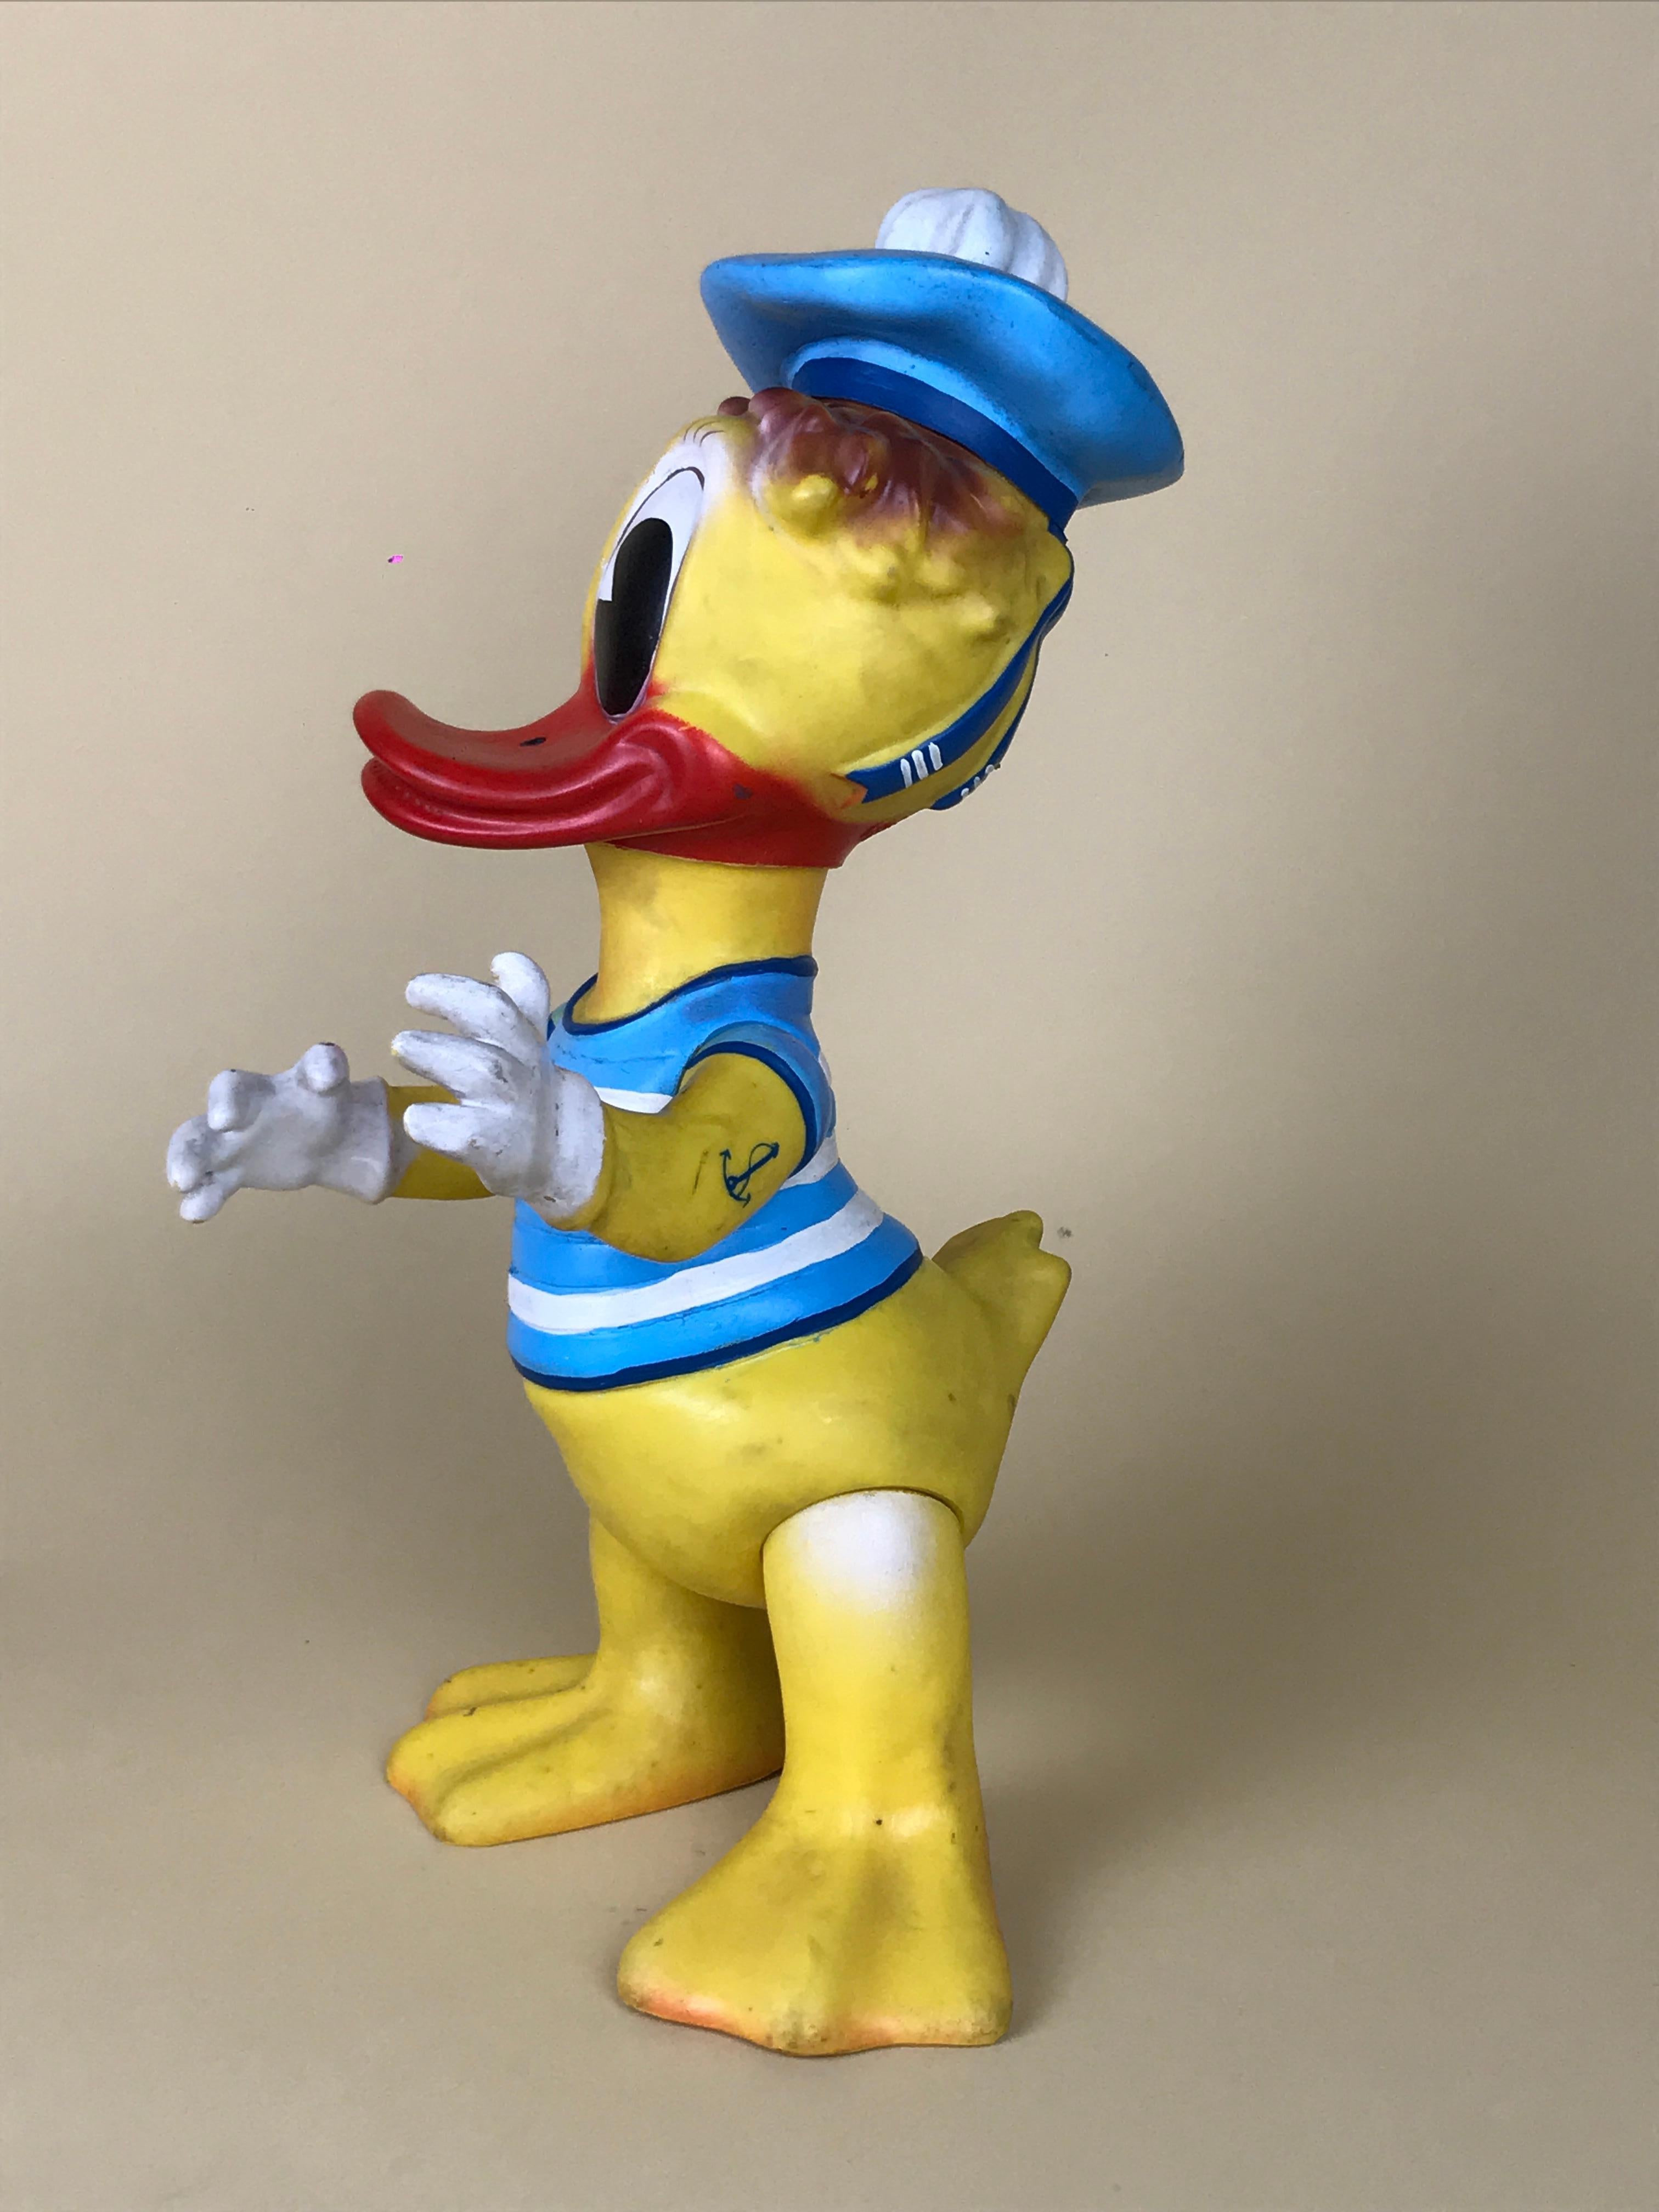 Vintage original Disney Donald Duck sailor rubber squeak toy made in Romania by Aradeanca in the 1960s.

Donald Duck sports two tattoos an anchor on the left forearm and a heart with arrow on the right forearm.

Marked with Aradeanca teddy bear